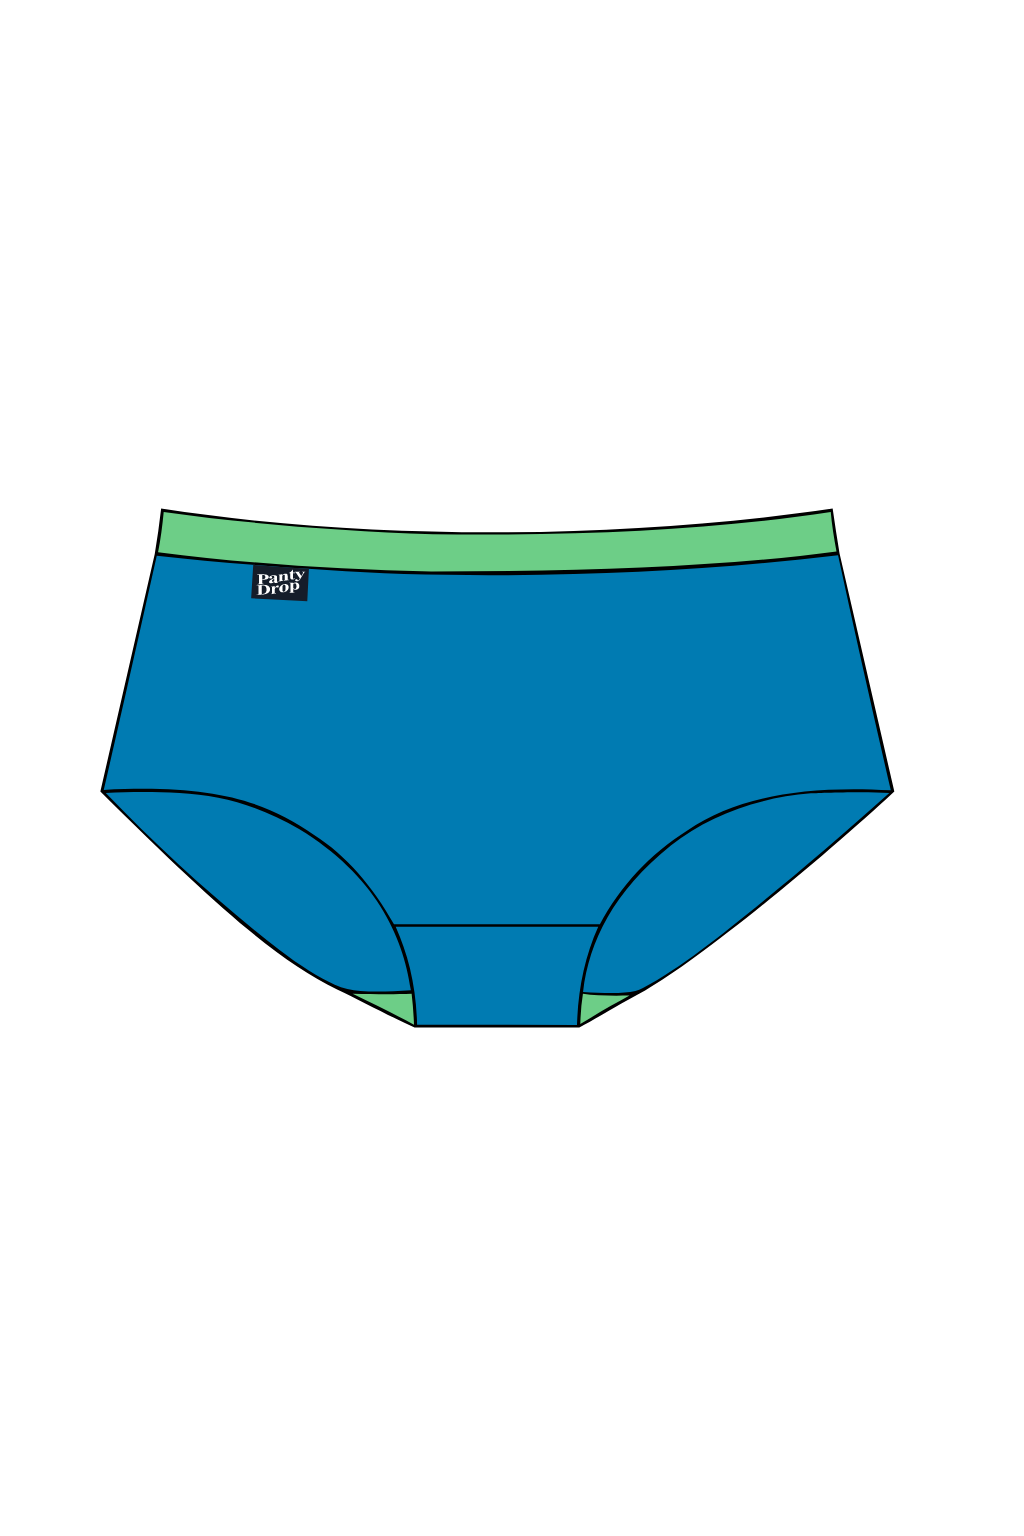 Perfect Panty v2 - Previous Colors